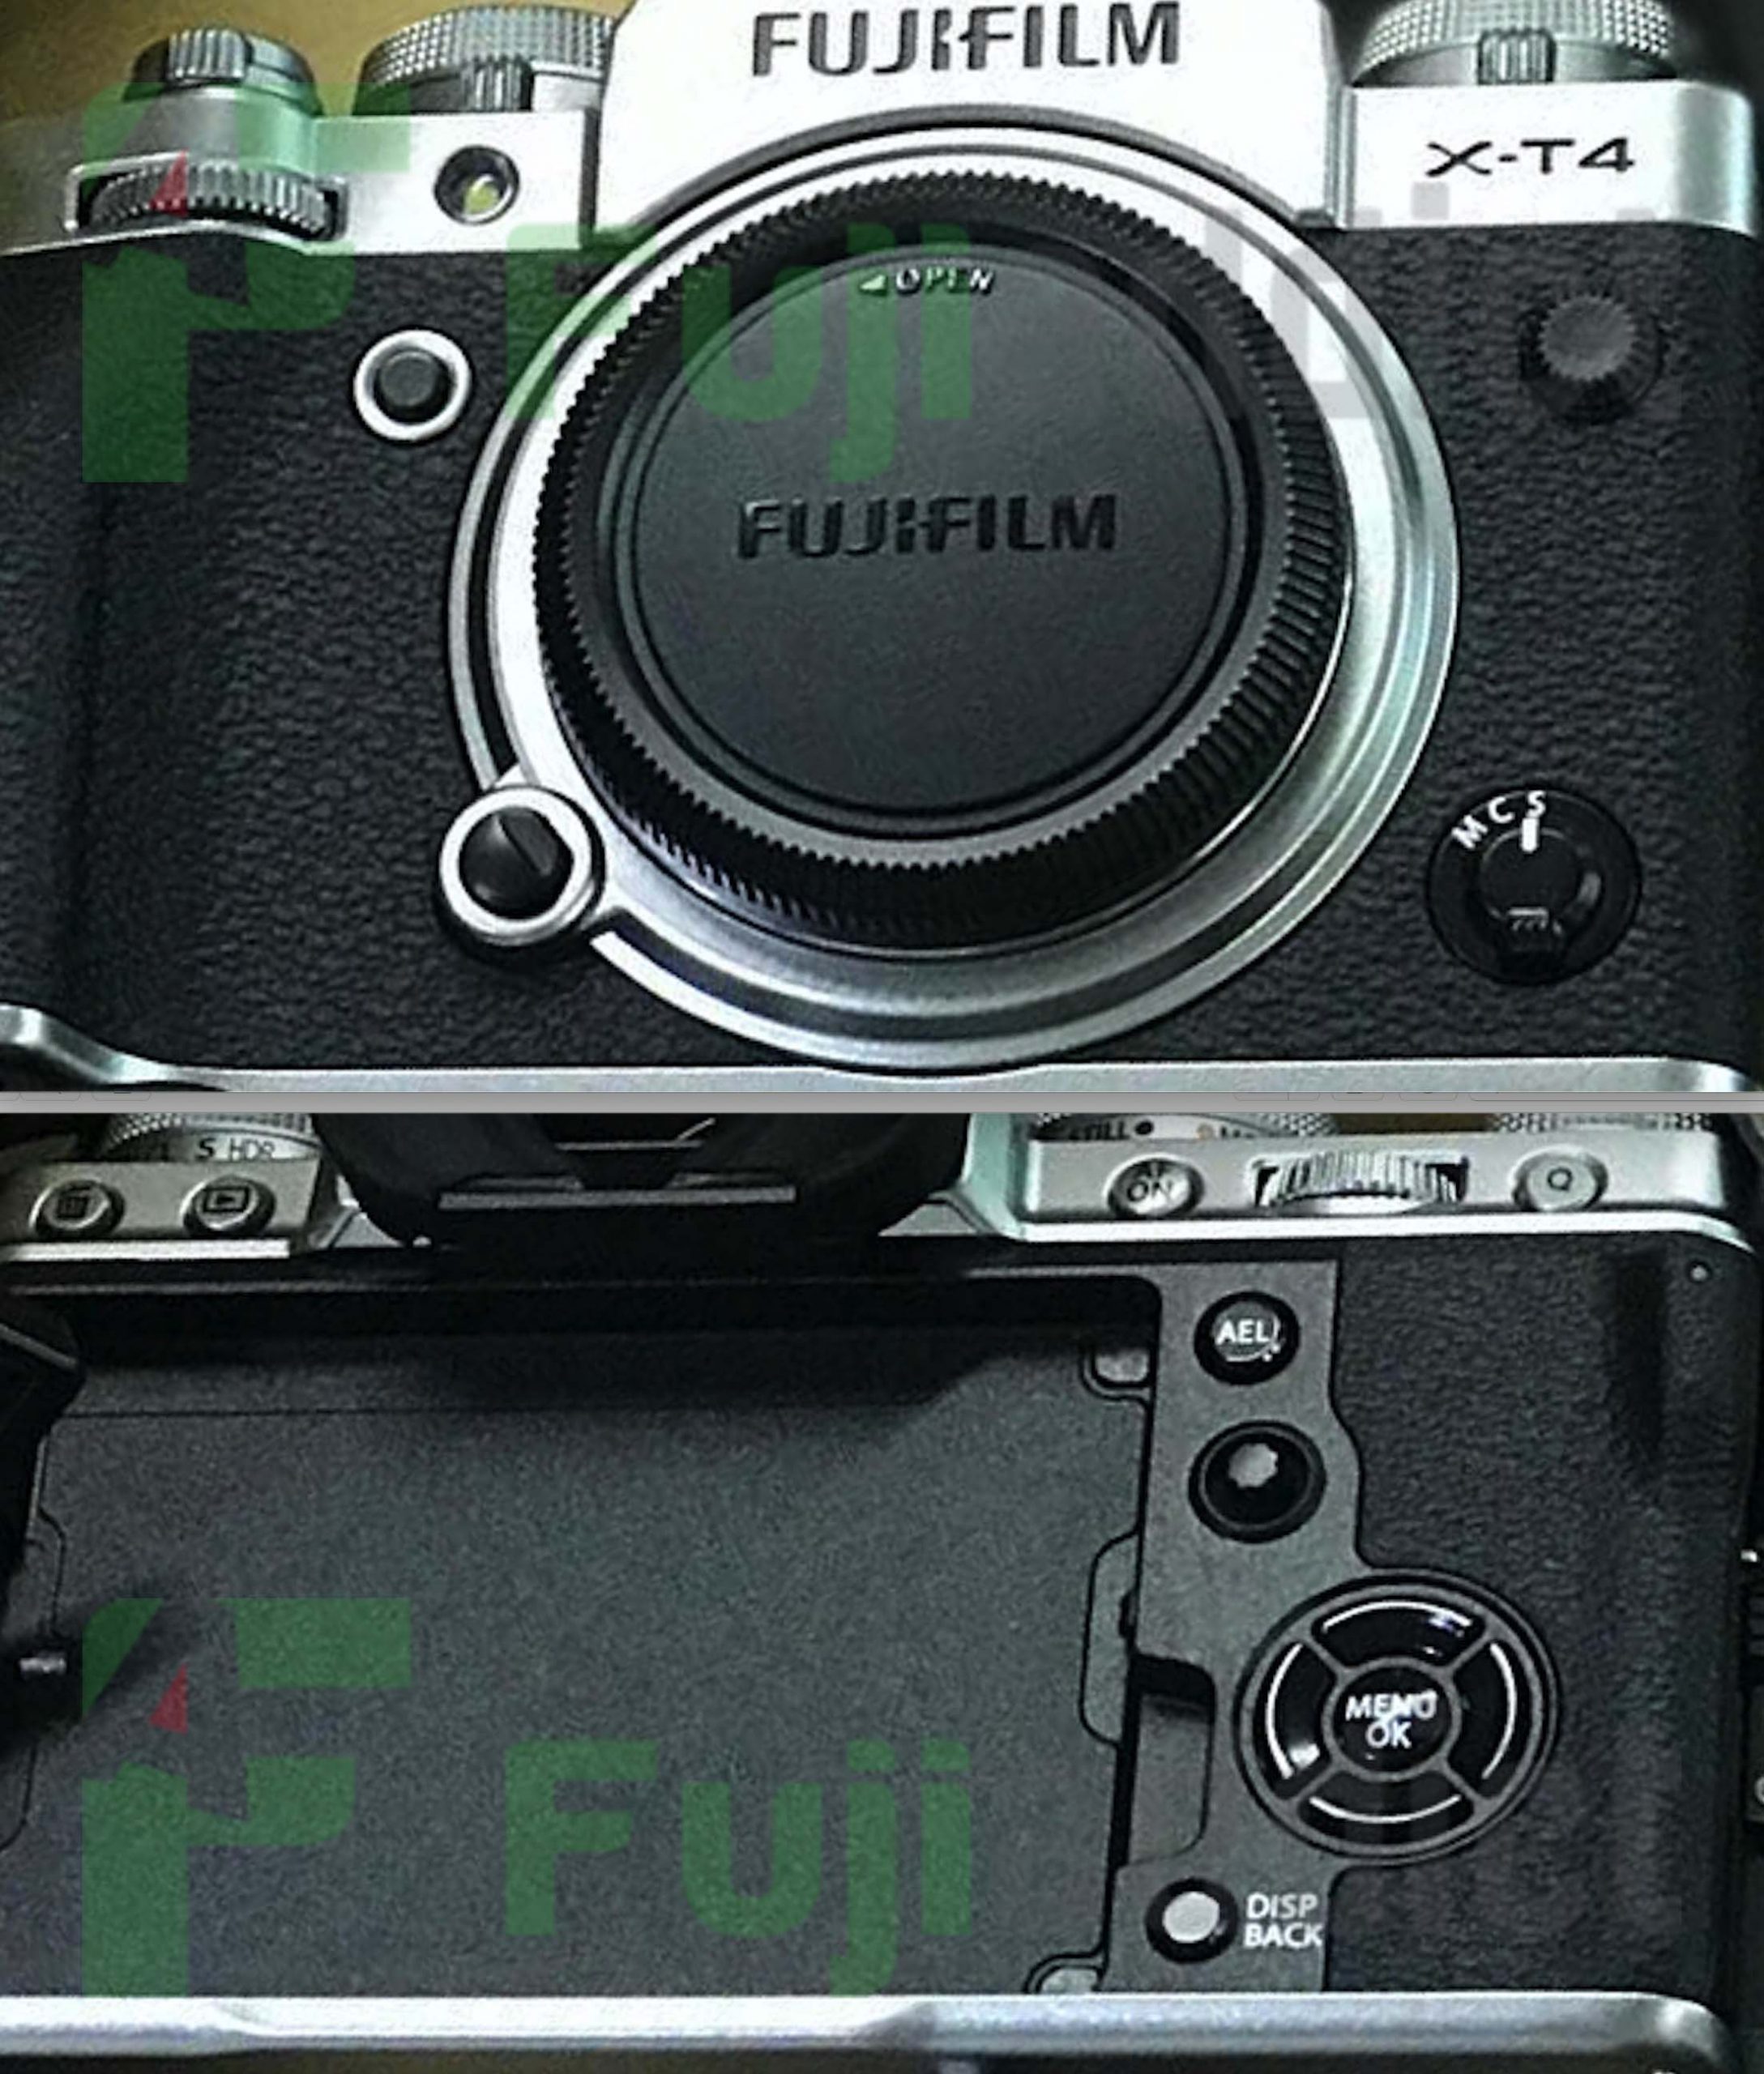 NEW Fujifilm X-T4 Info and First Leaked Pictures! - Fuji Addict